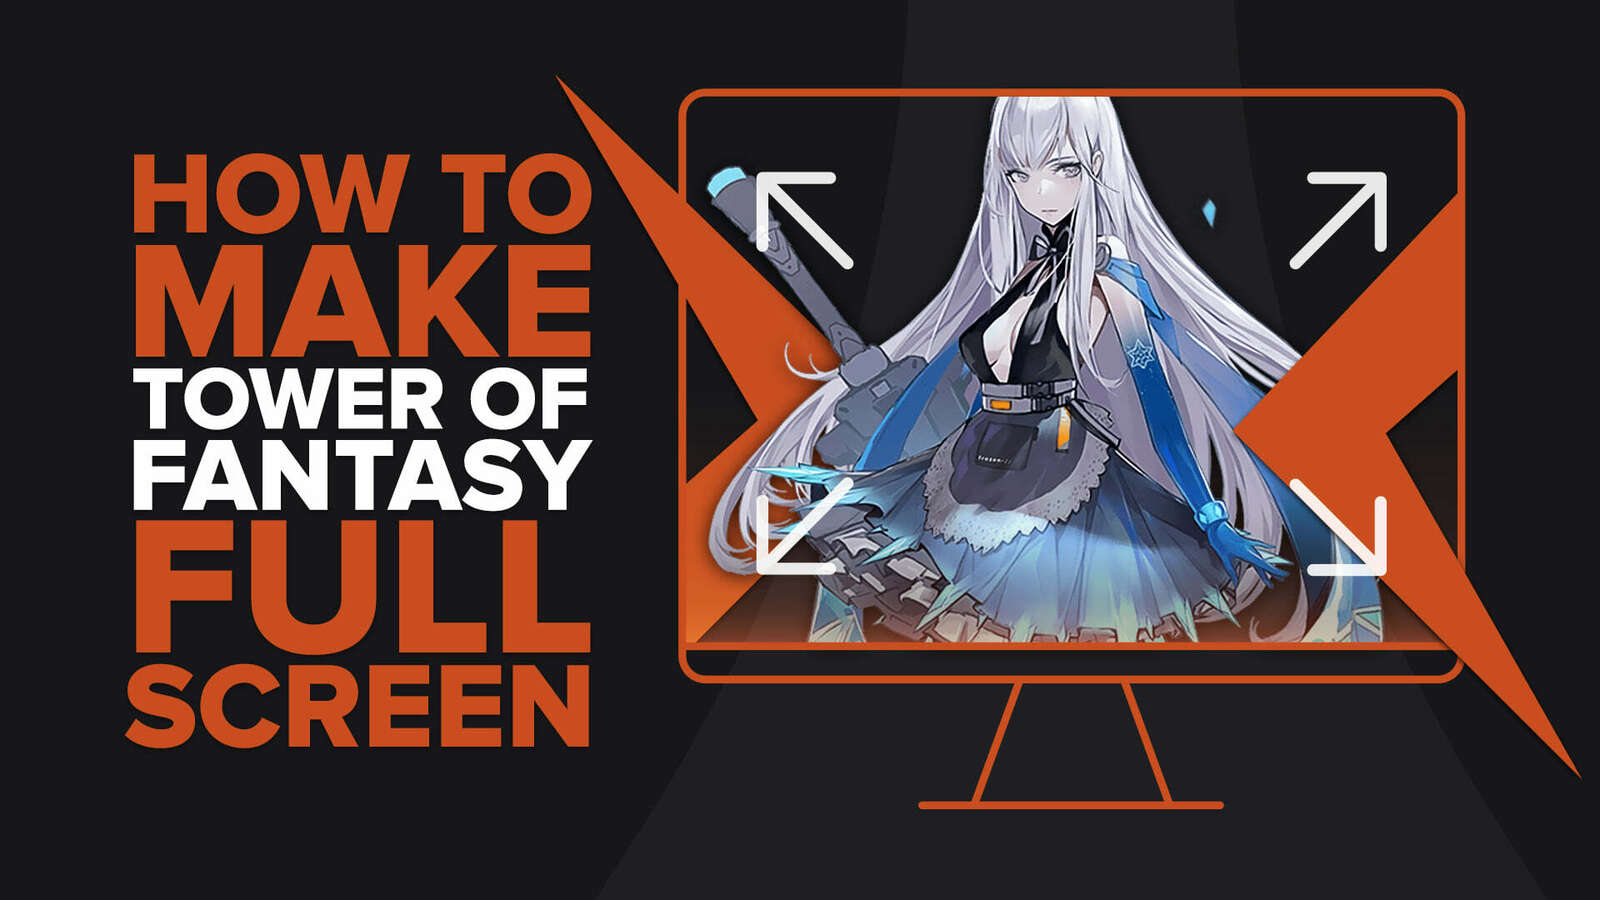 How to make Tower Of Fantasy Fullscreen and Fix the Minimized Bug [Solved]